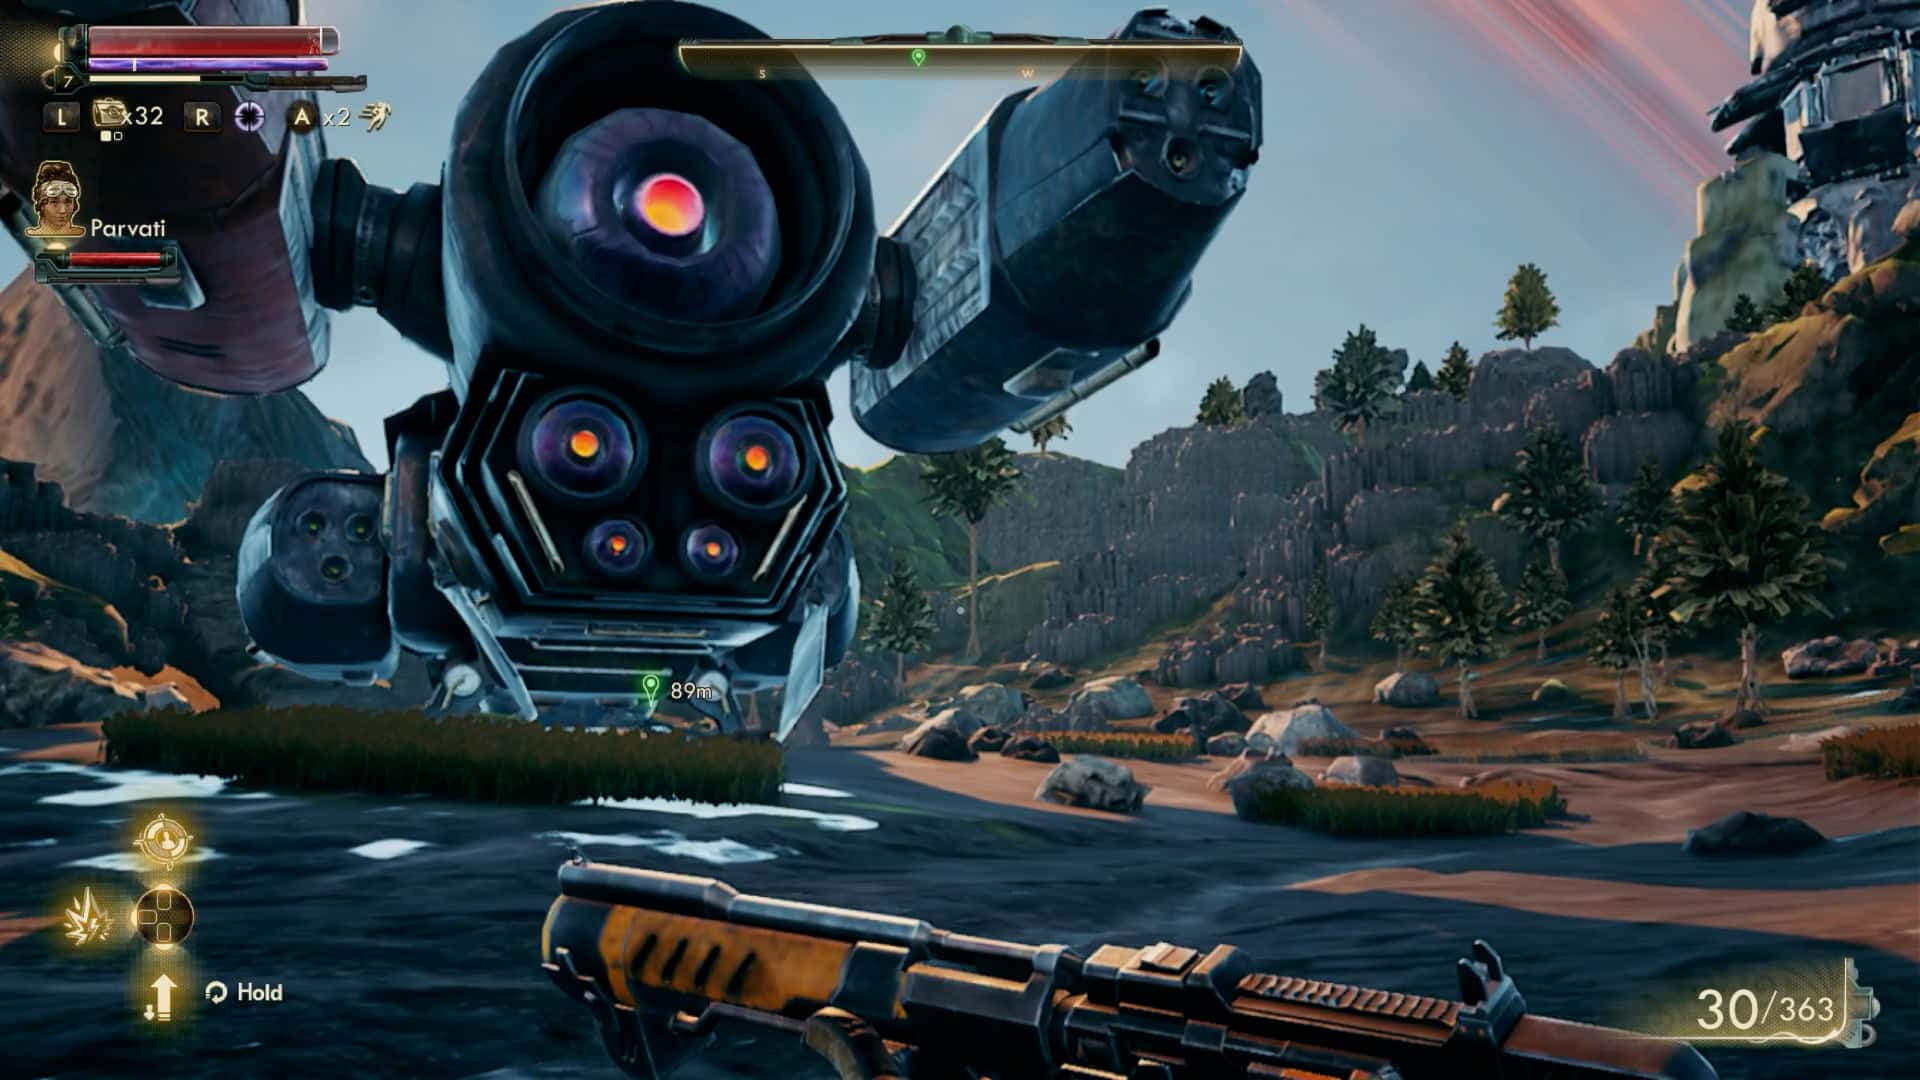 is the Outer worlds fixed on switch?